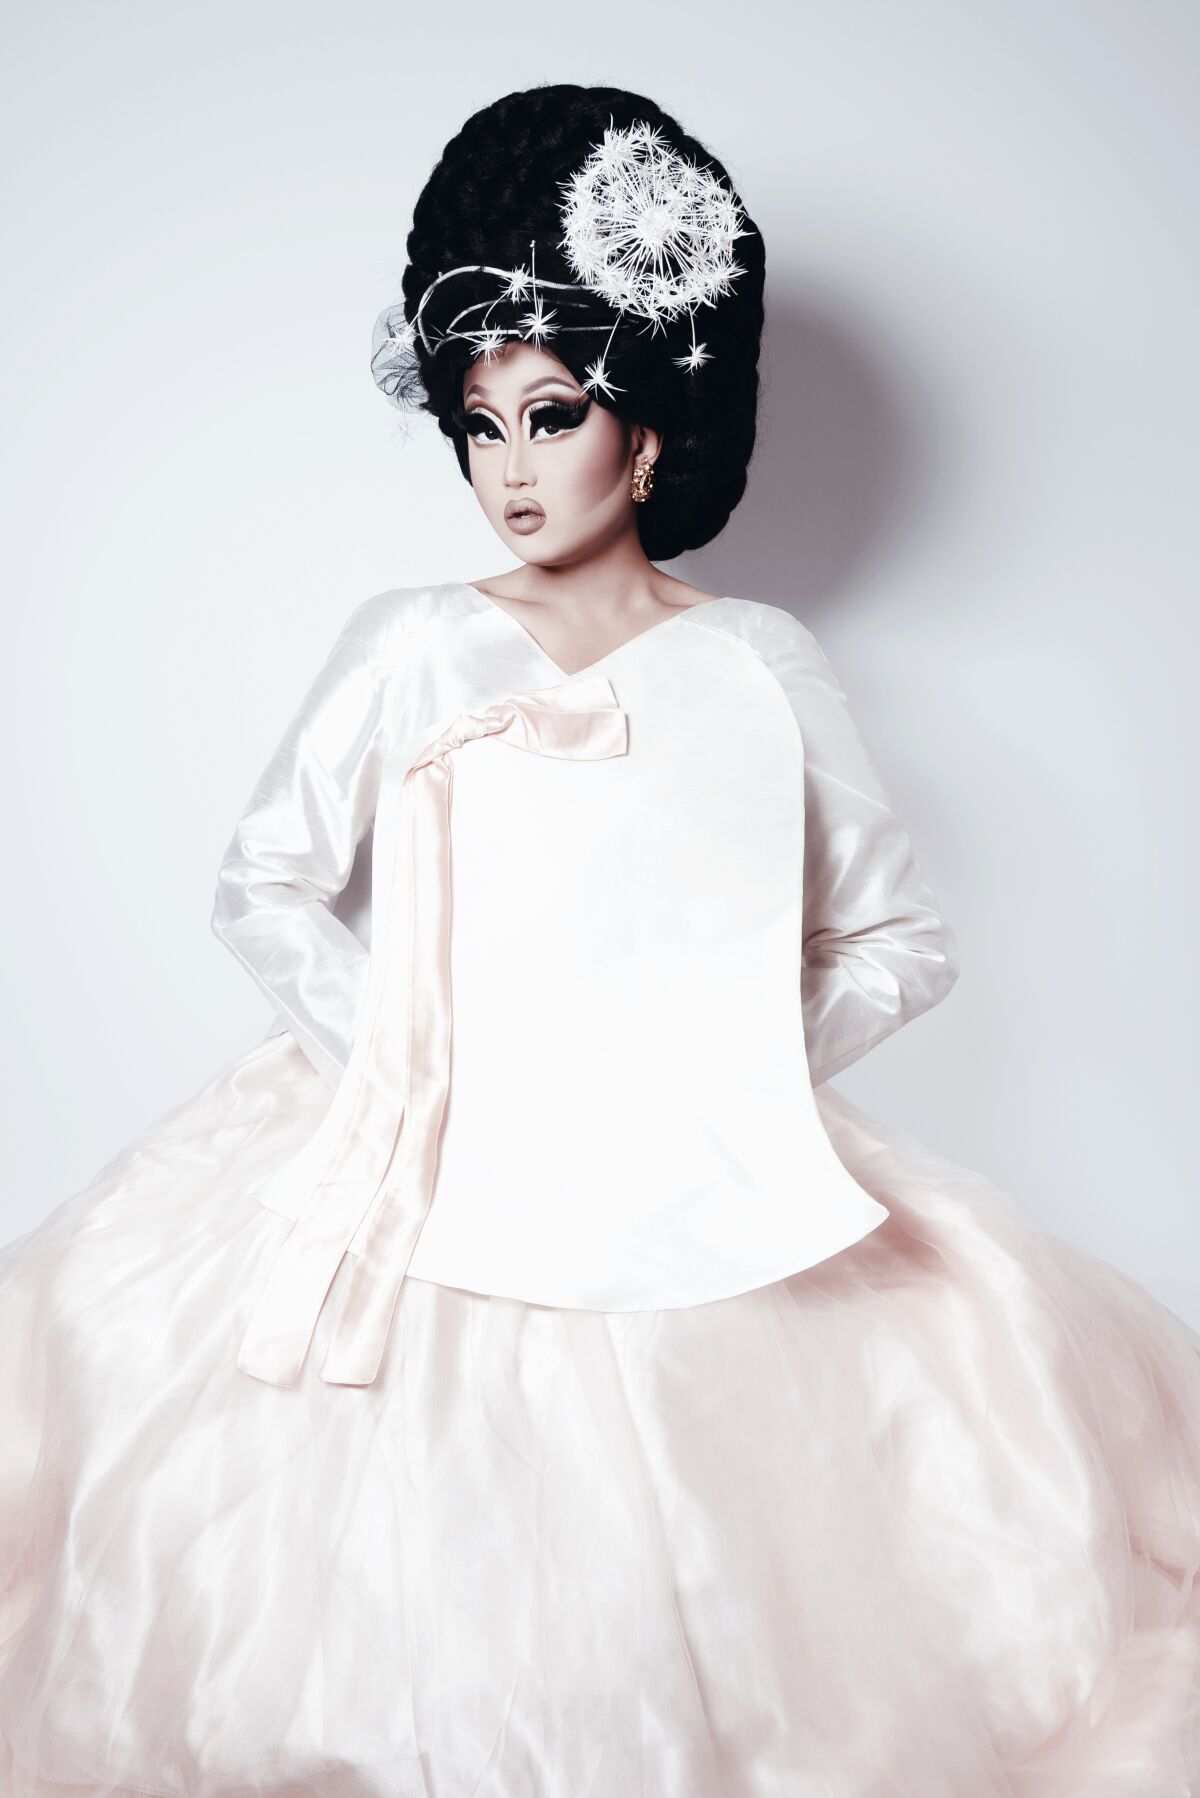 Kim Chi was the first Korean American contestant on “RuPaul's Drag Race.”